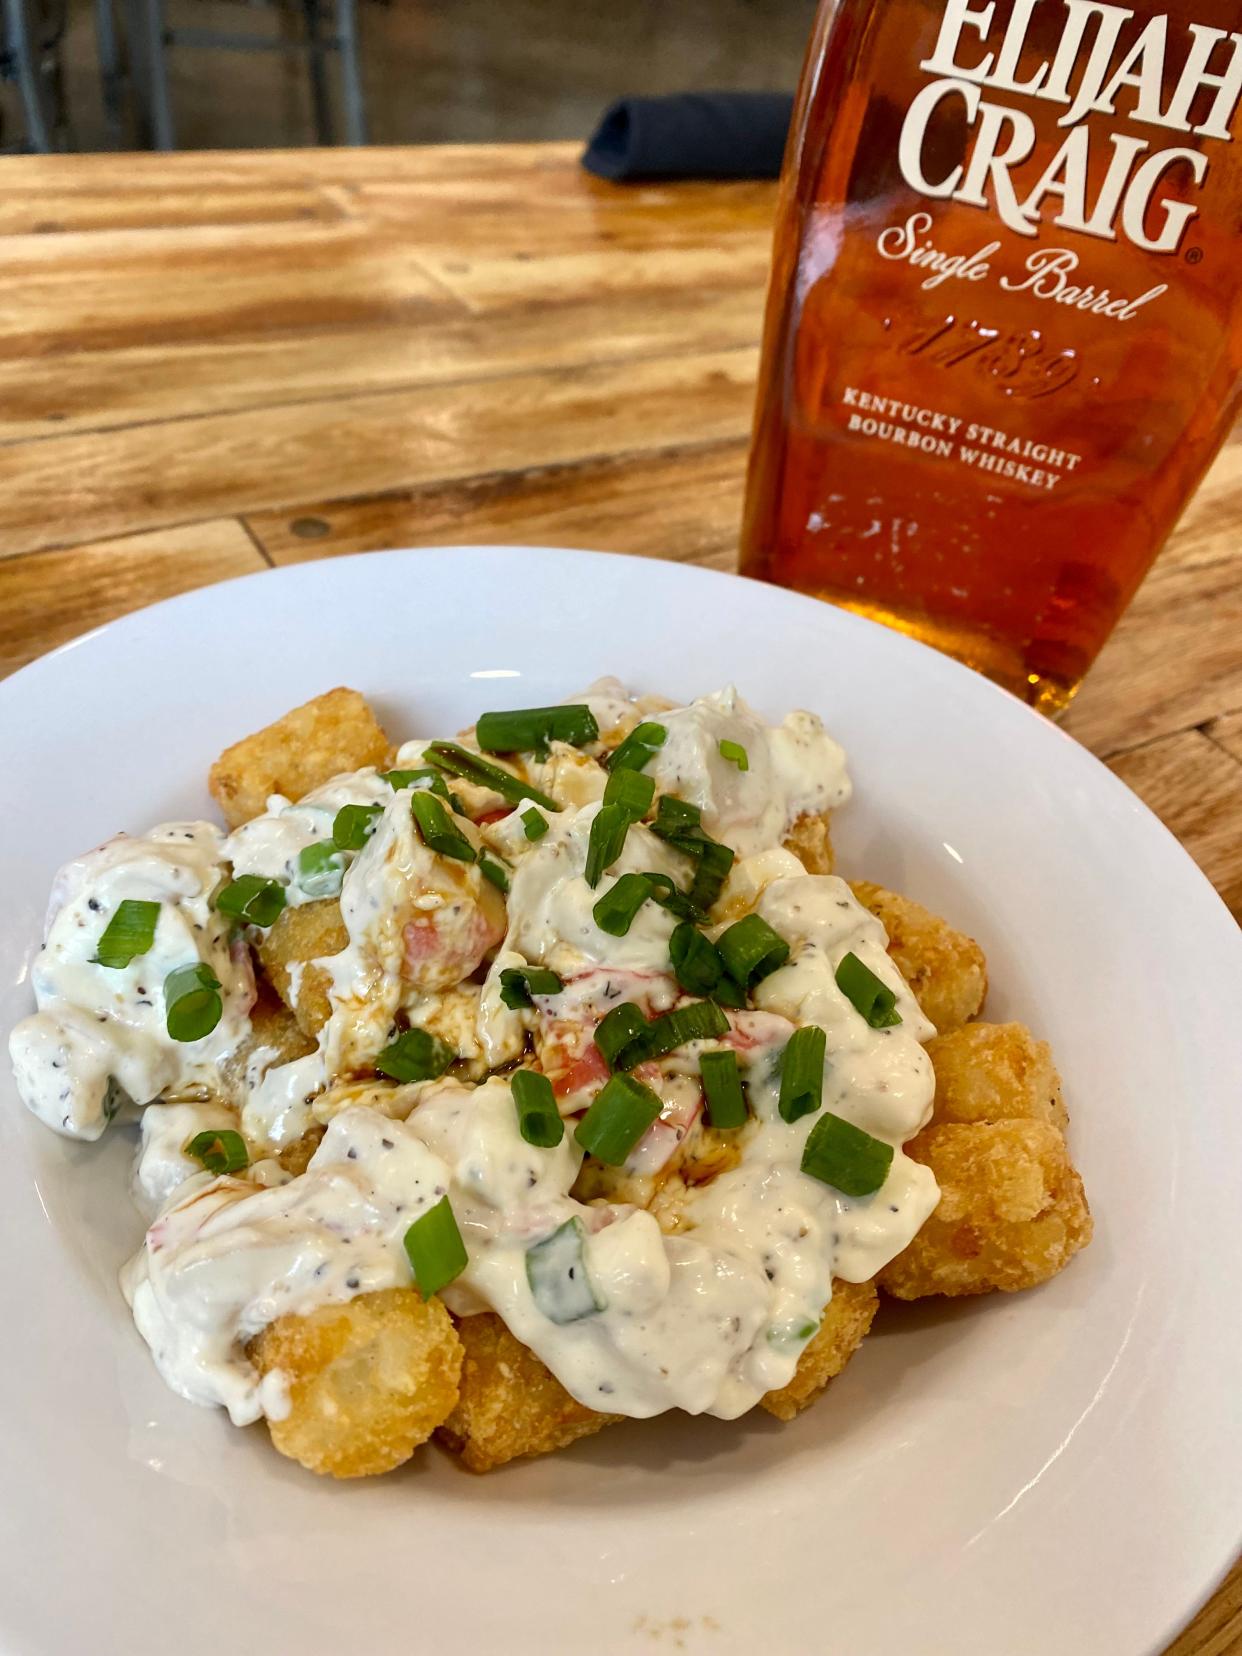 A special that you'll sometimes find offered at the Cap & Cork - Tots smothered in a crab rangoon style topping with cream cheese, finished with scallions.